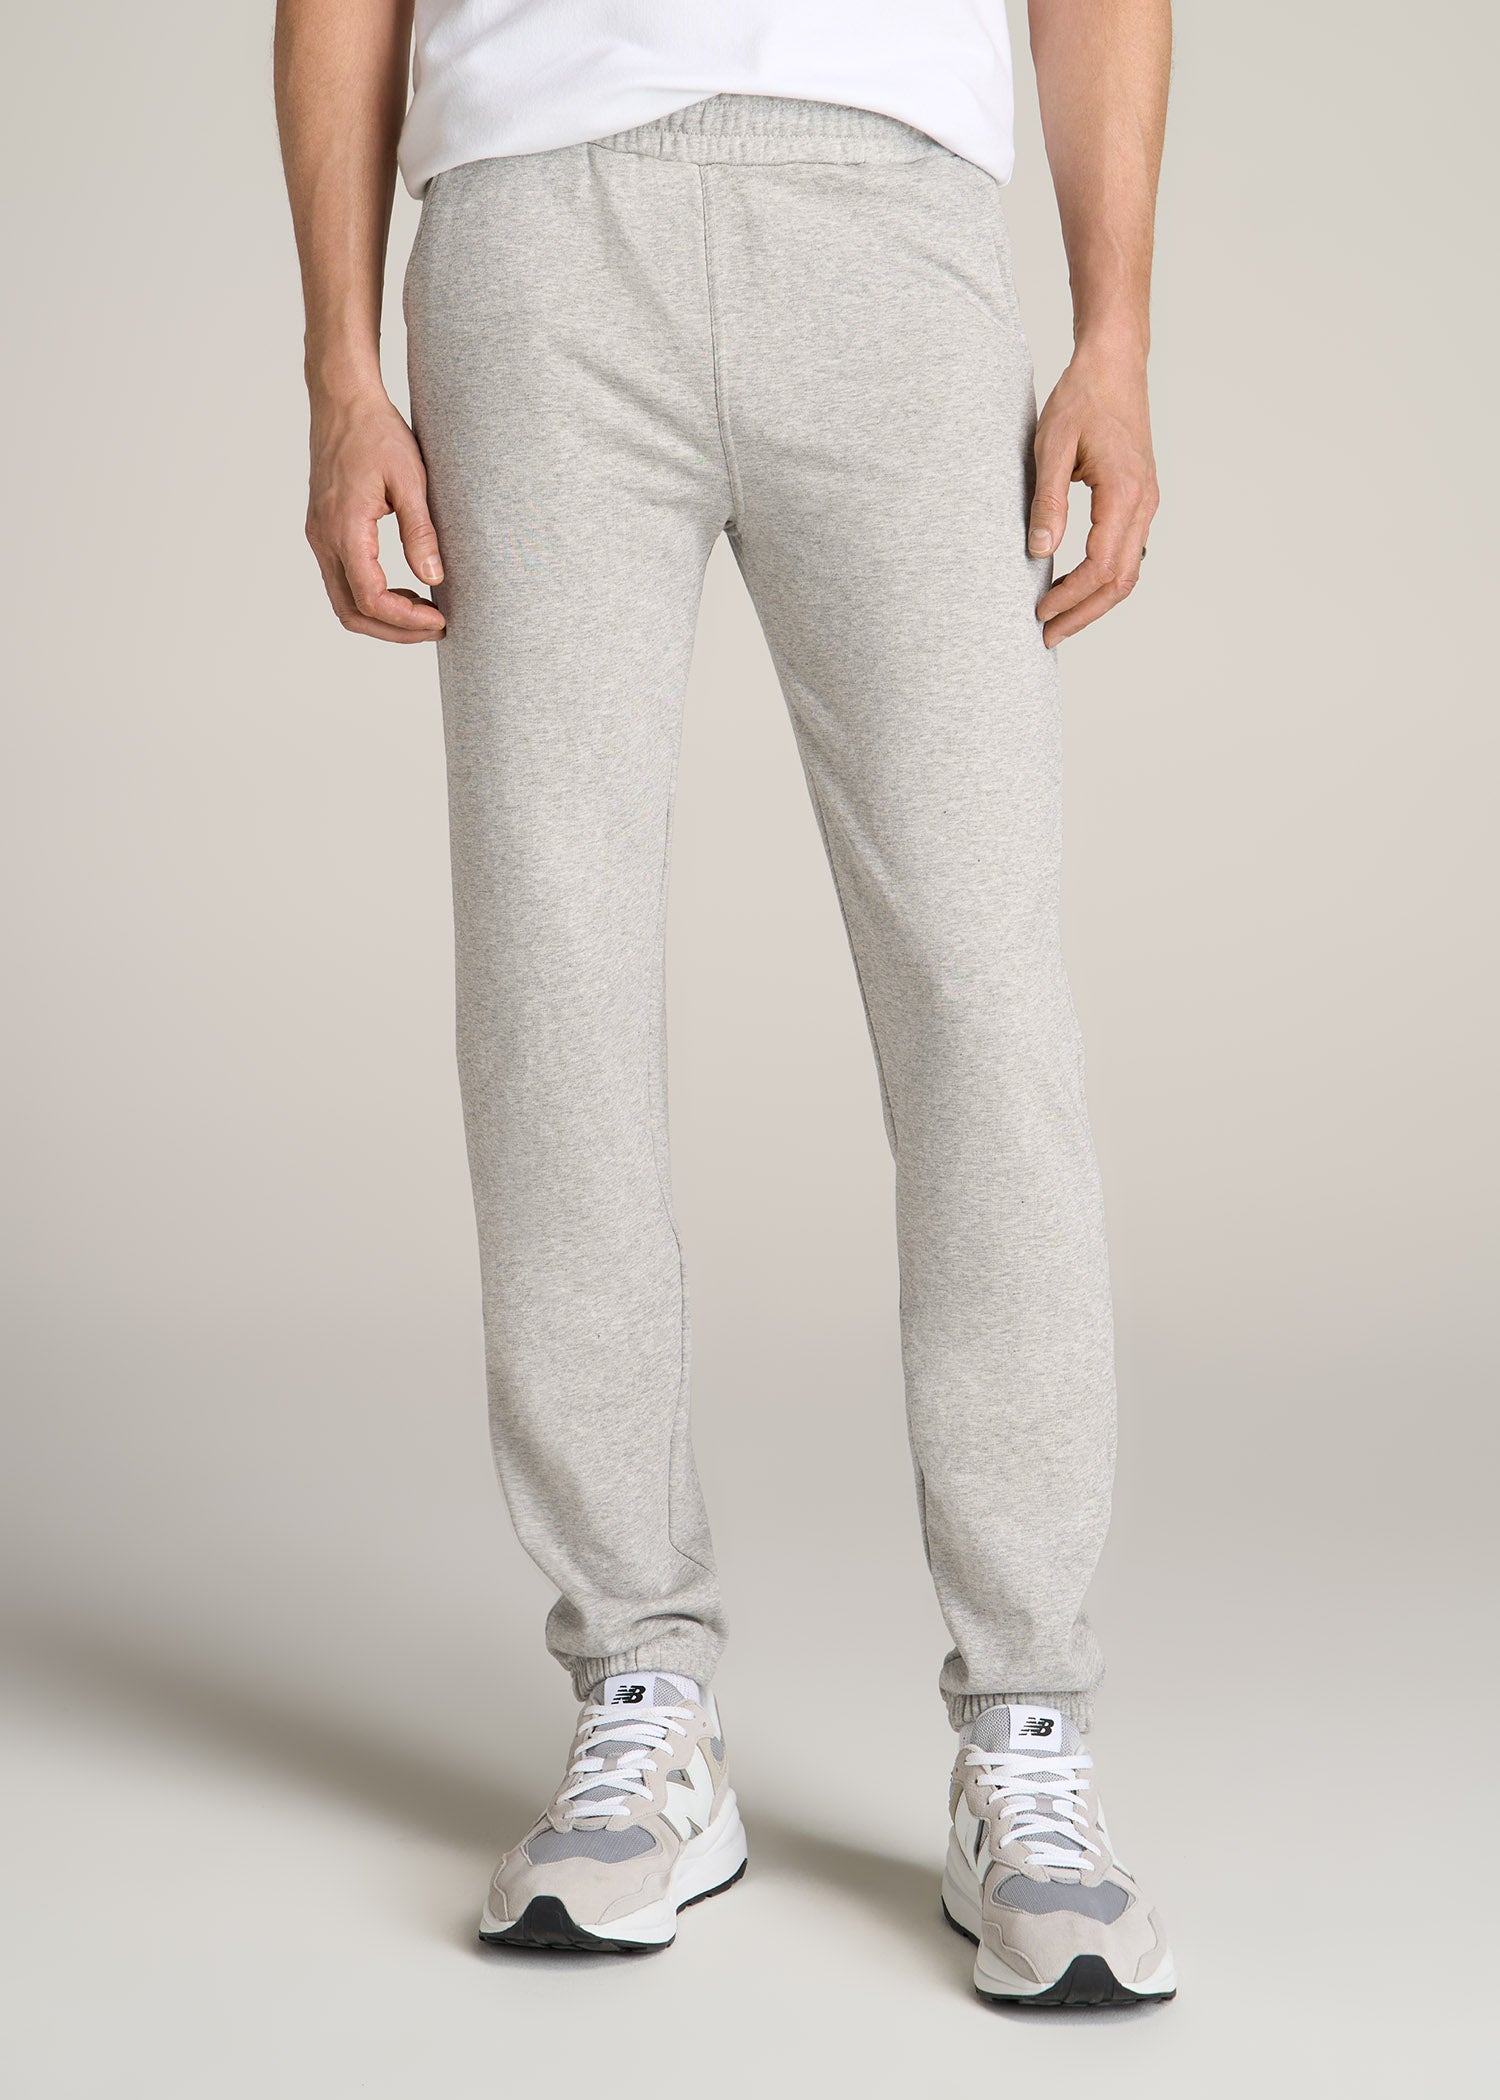 LULULEMON City Sweat Slim-Fit Tapered French Terry Sweatpants for Men